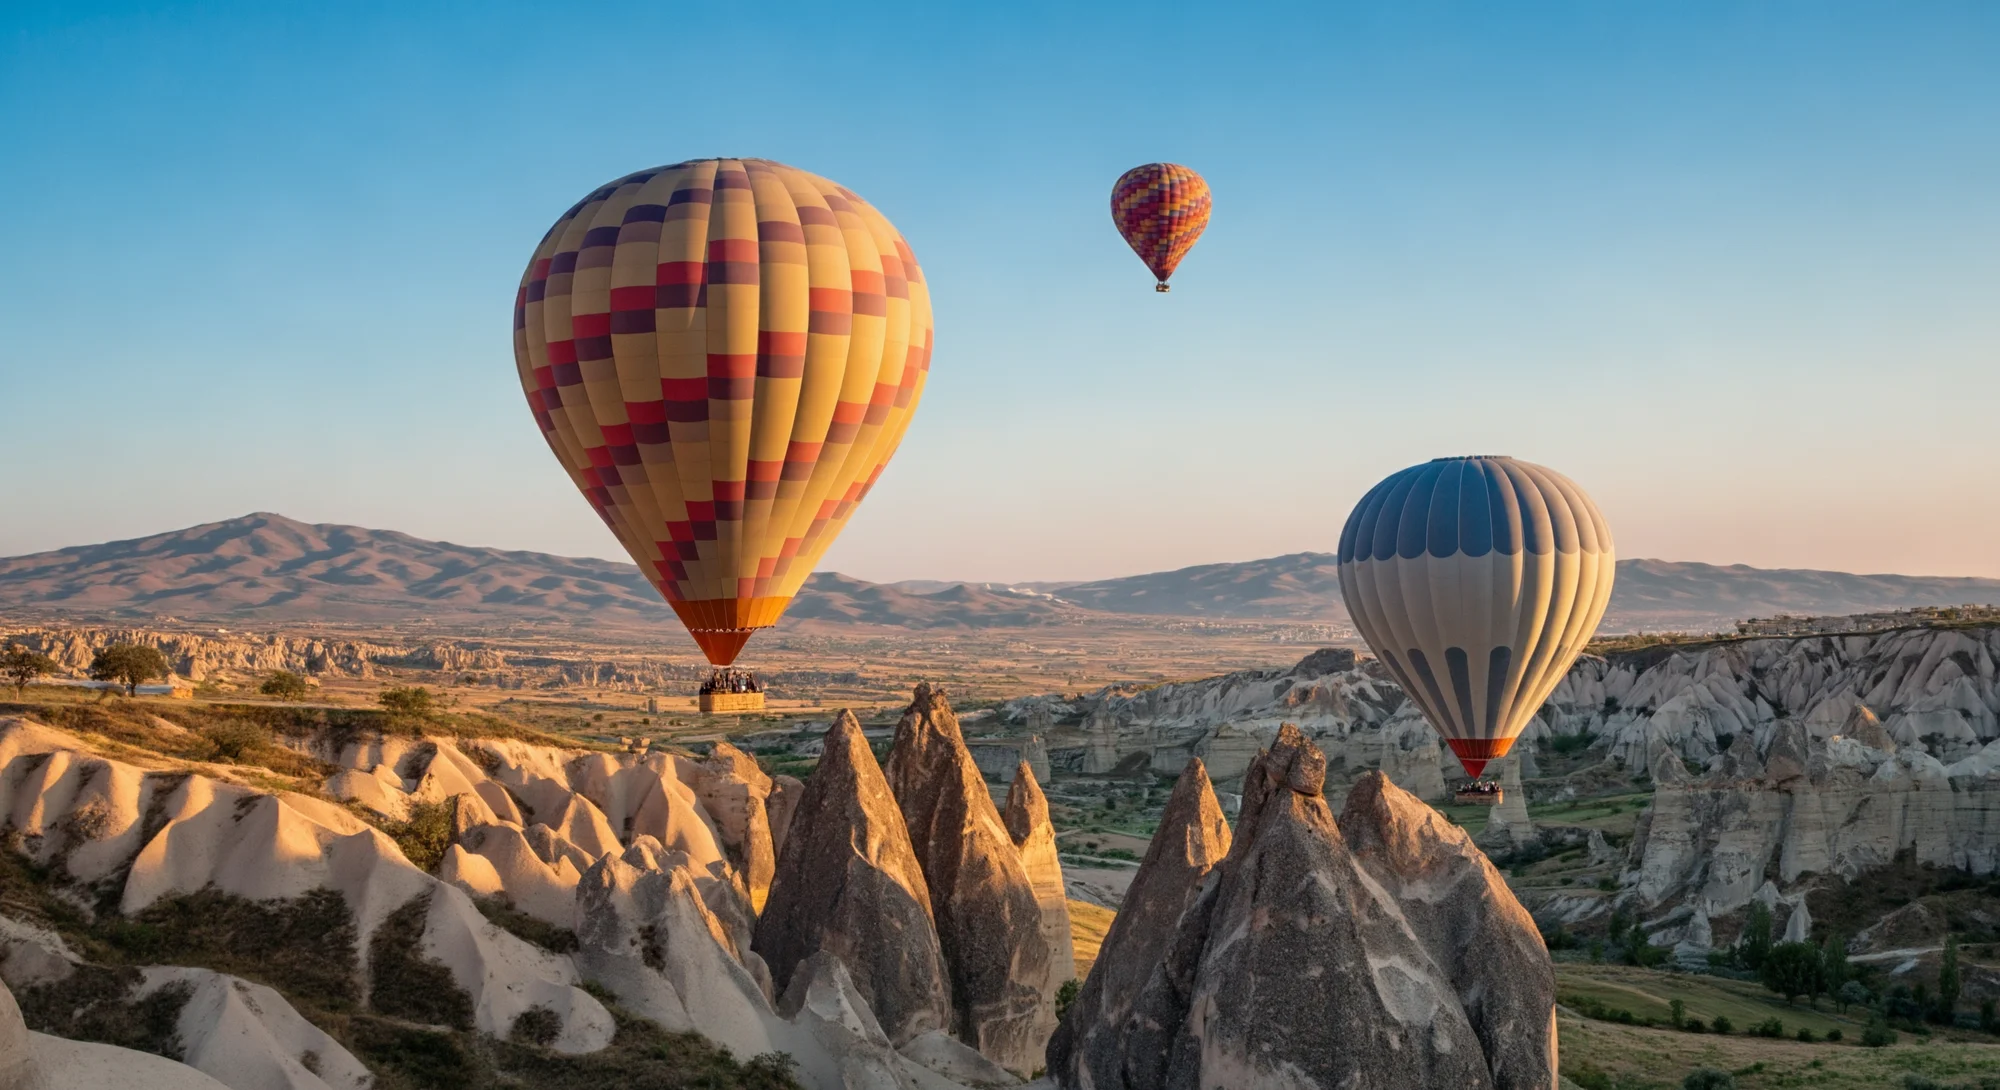 Three hot air balloons float in the sky above a rugged landscape of rock formations. The balloons are colorful and have a basket hanging below them. The sun is shining and the sky is blue.